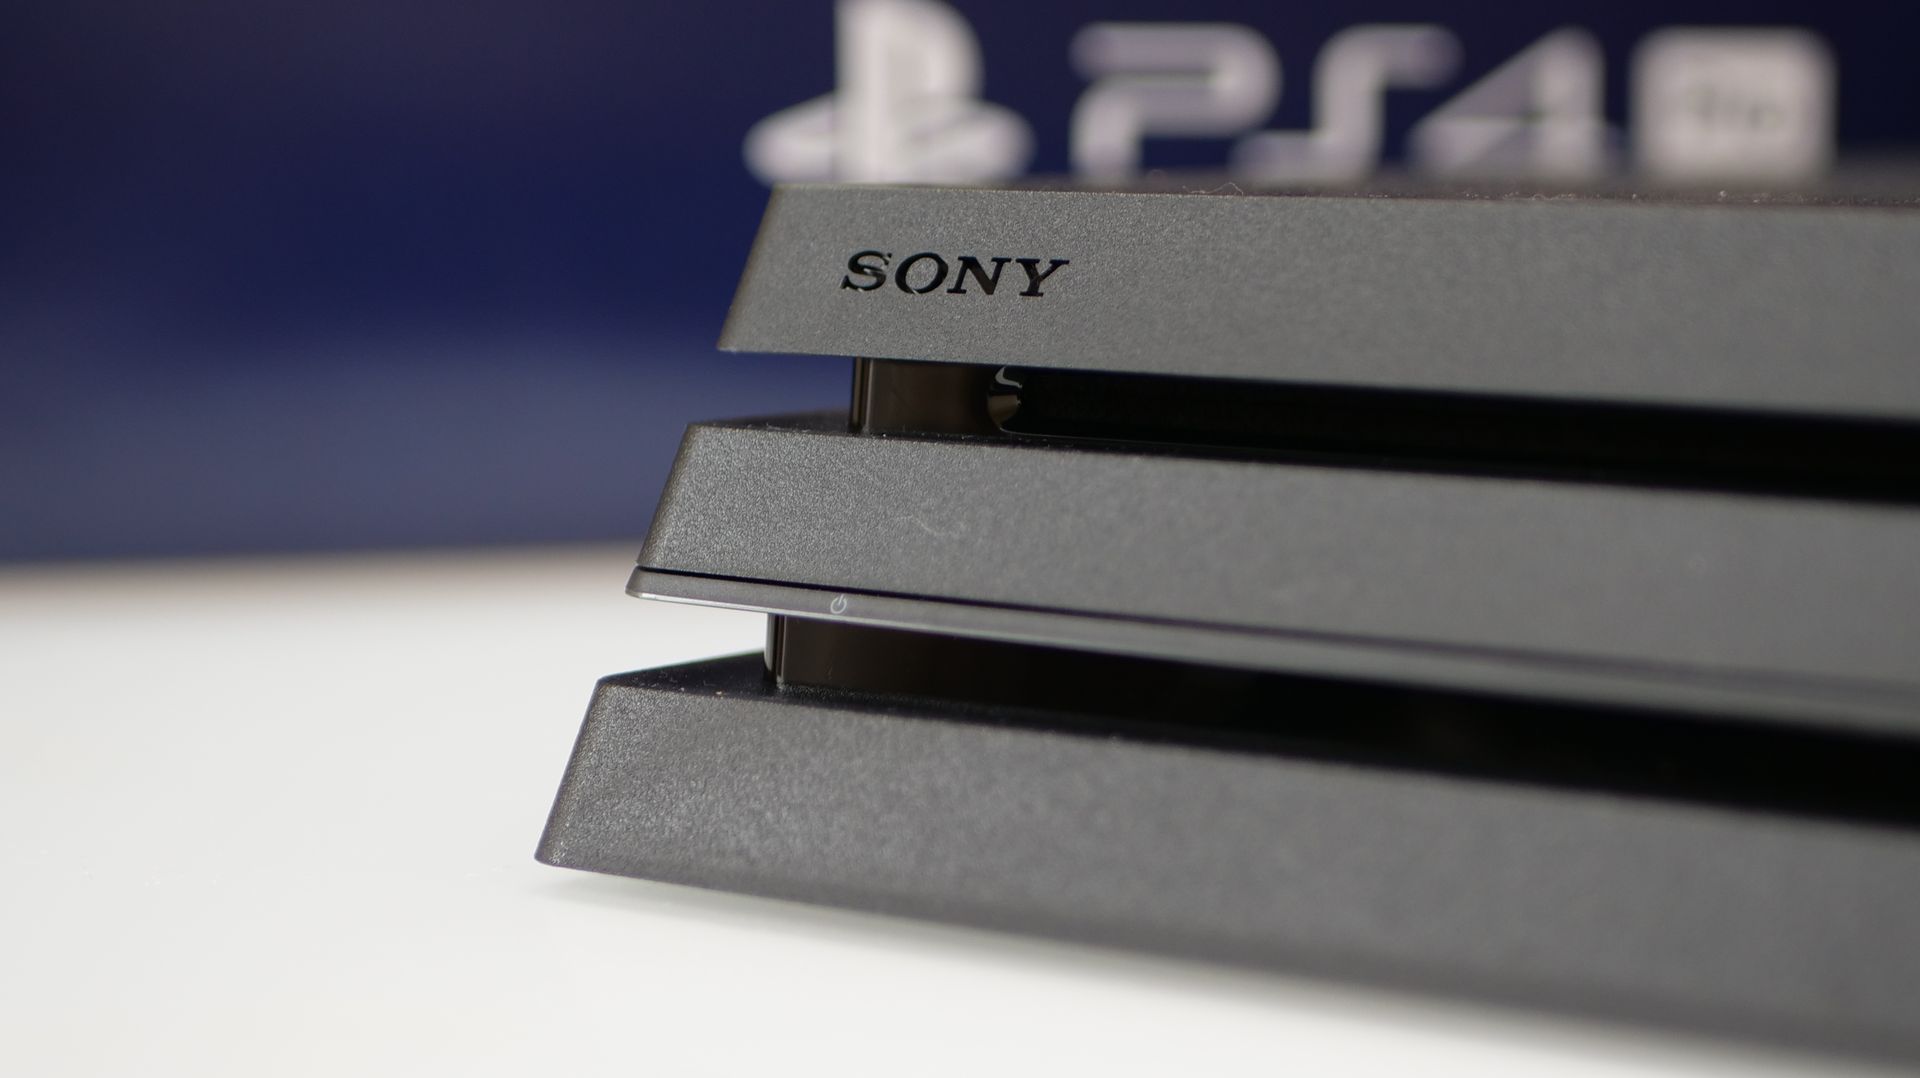 Are Pro Consoles here to stay? - nerdpundit